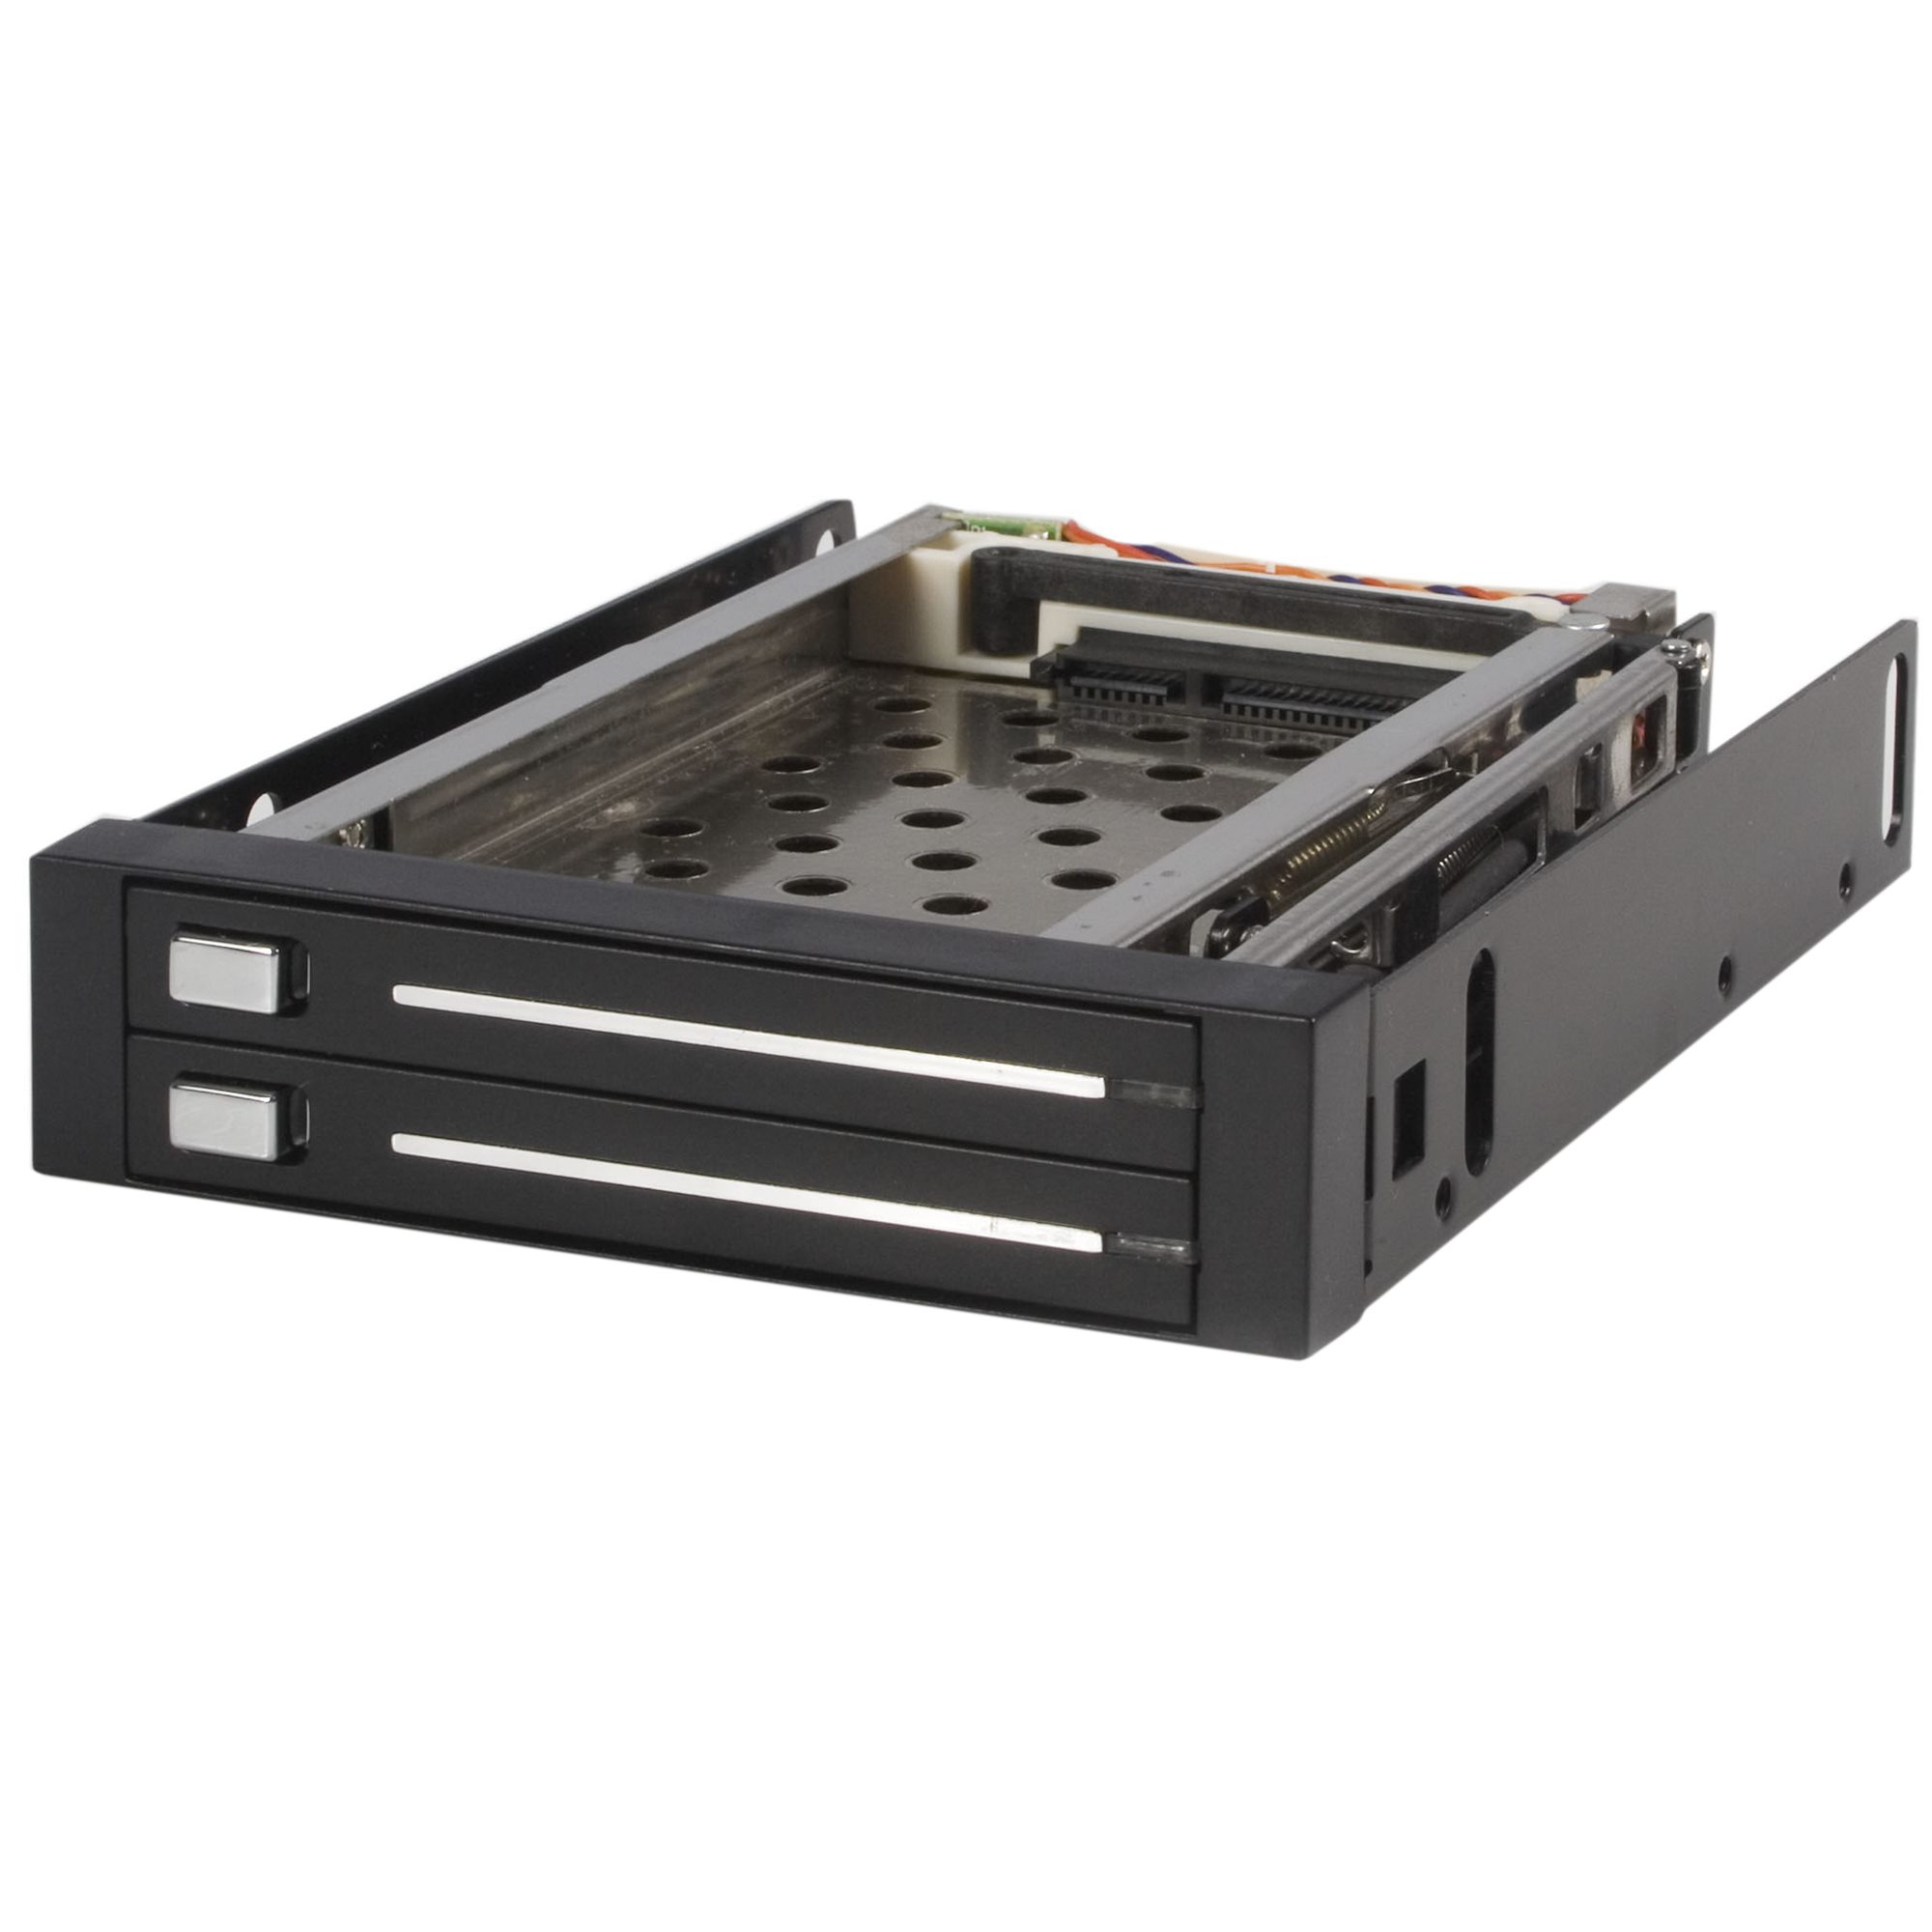 Other places Brick Outflow 2 Drive 2.5in Trayless SATA Mobile Rack - Hard Drive Racks - HDD Mobile  Racks & Backplanes | StarTech.com